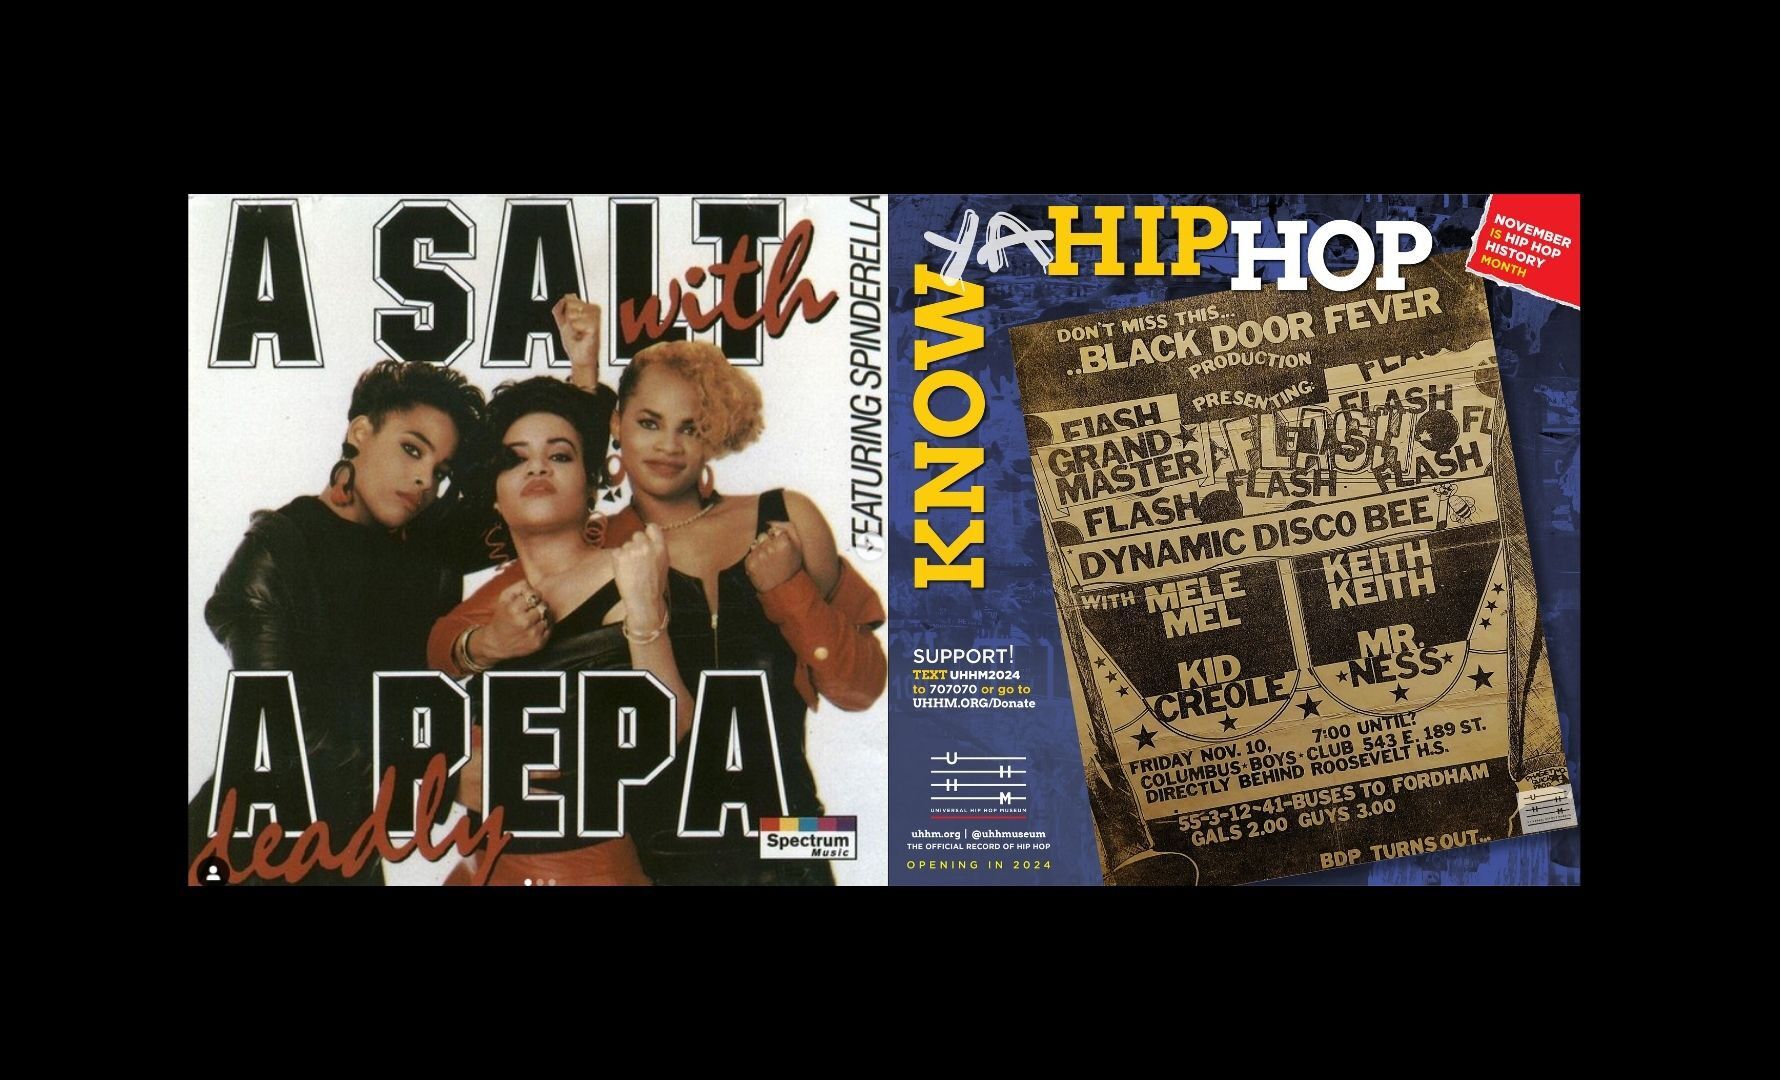 KNOW YA HIP HOP: Salt ‘N’ Pepa, Grandmaster Flash & The Furious 4, And An Announcement About A Special Night With The Sequence, Eddie F & Big Hutch